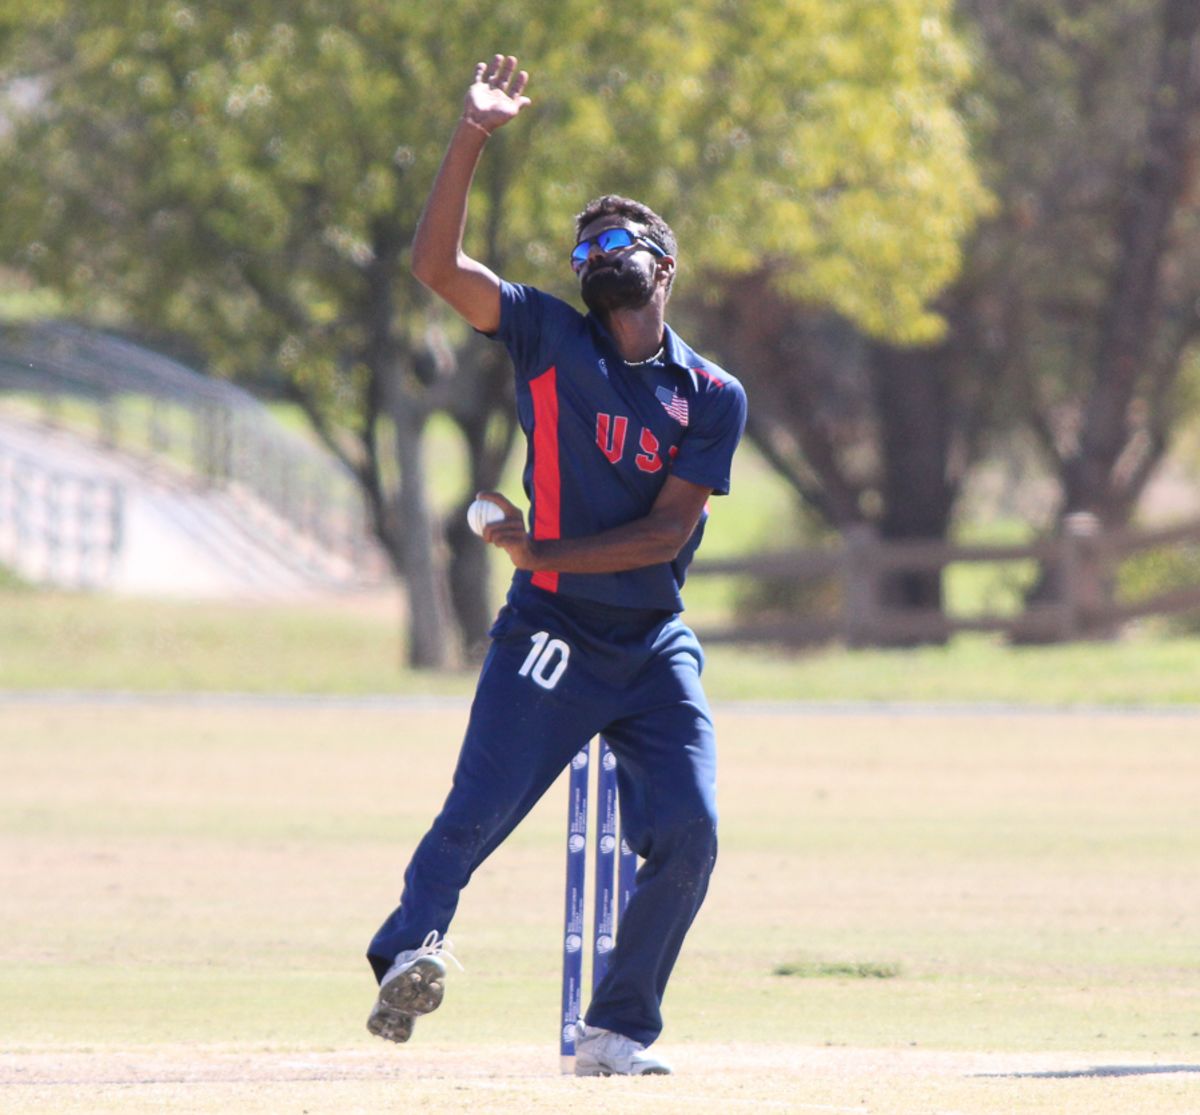 Prashanth Nair bowls during his spell of 3 for 42